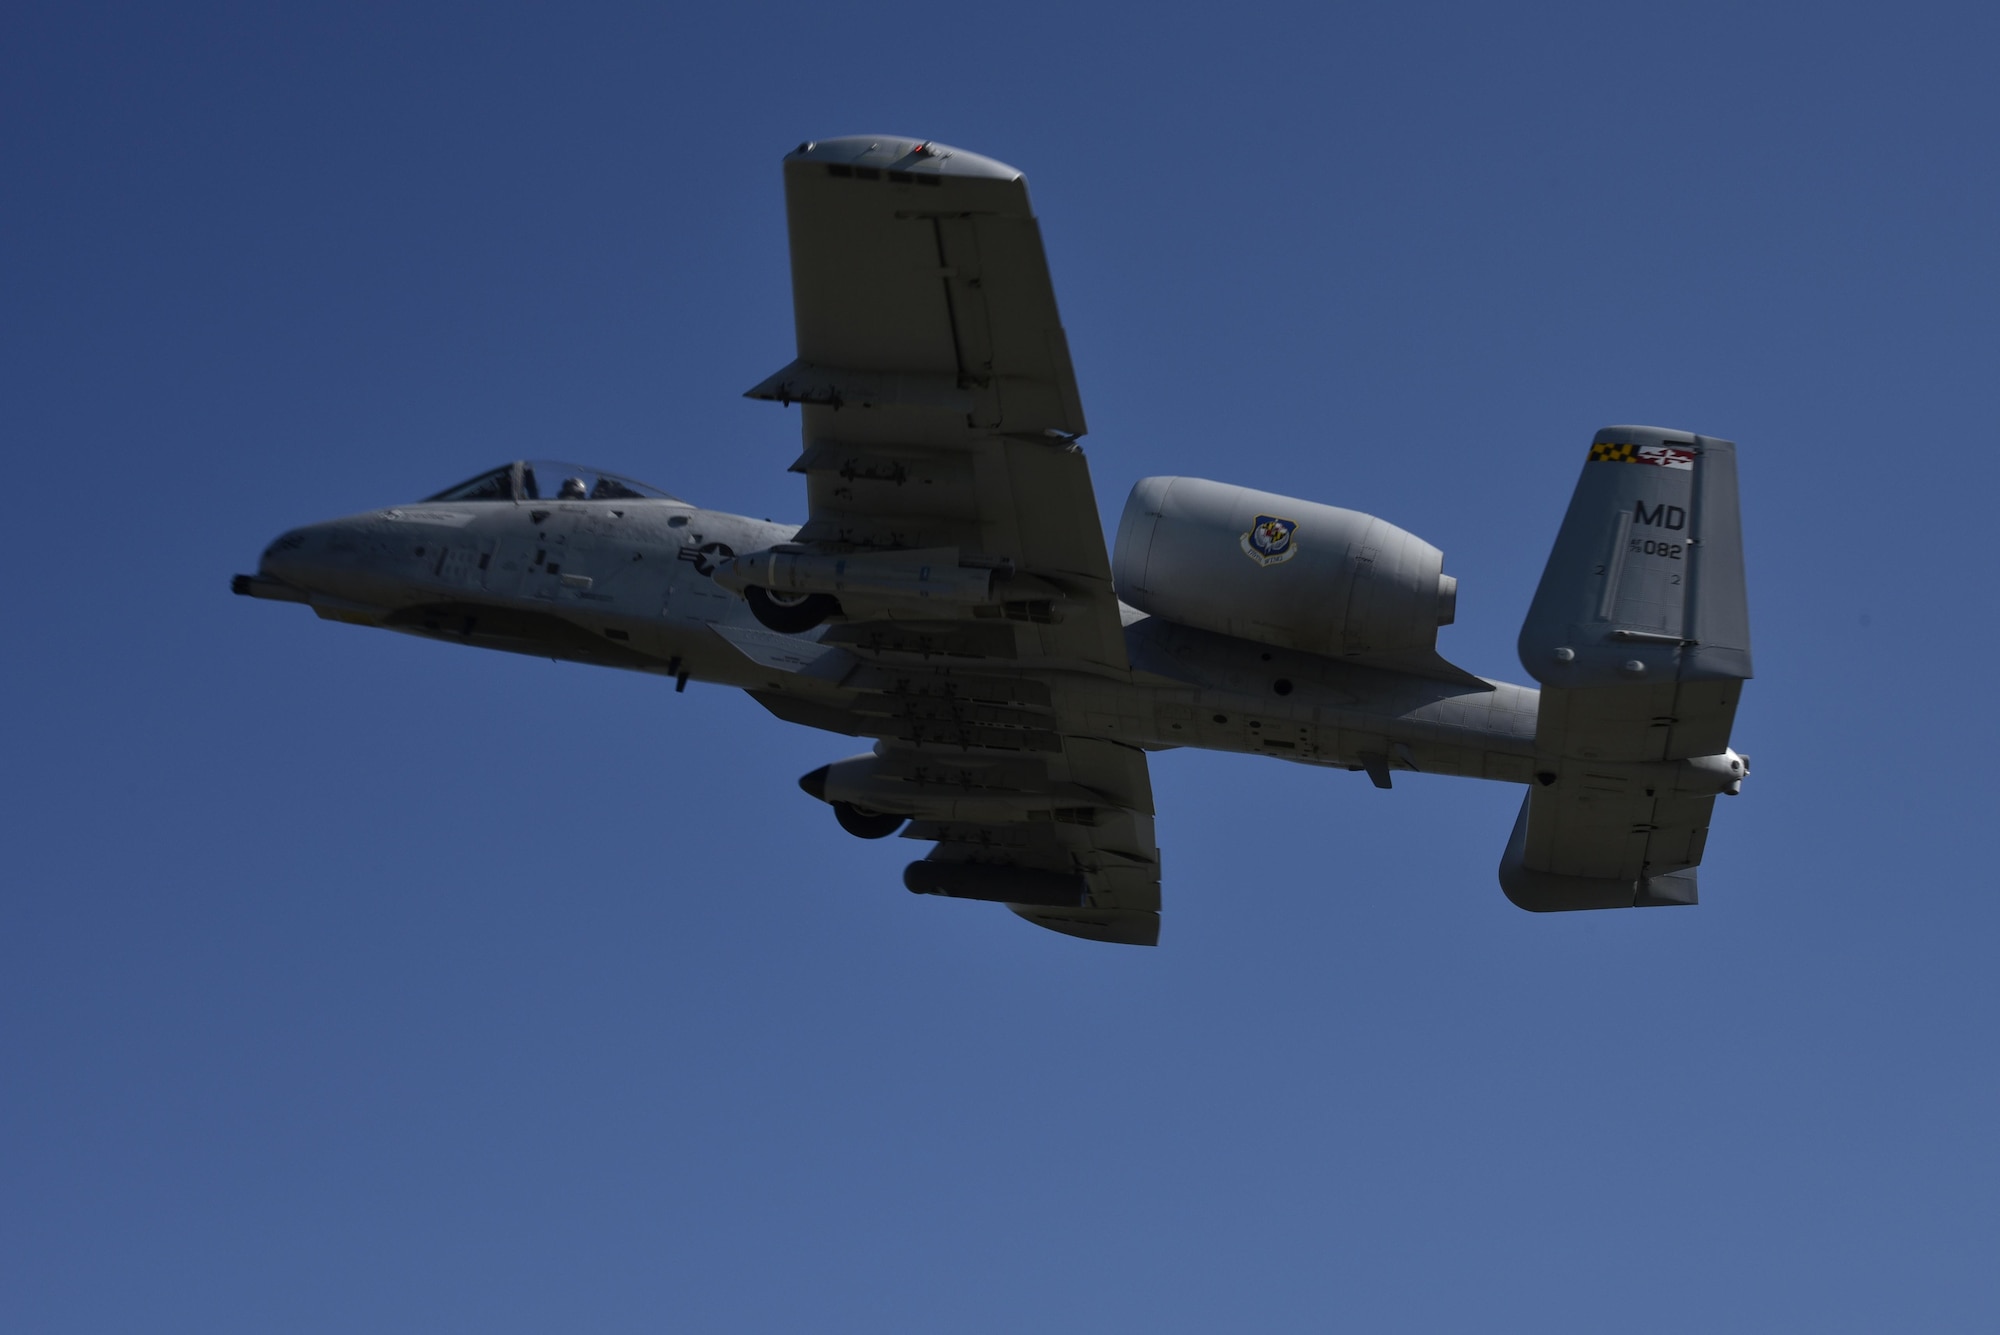 An A-10C Thunderbolt II aircraft from the 175th Wing, Maryland Air National Guard flies overhead Aug. 10, 2017, during a highway landing exercise at Jägala-Käravete Highway, Estonia. The flying training deployment is funded by the European Reassurance Initiative in support of Operation Atlantic Resolve. The U.S. Air Force’s forward presence in Europe allows the U.S. to work with allies and partners to develop and improve ready air forces capable of maintaining regional security. (U.S. Air National Guard photo by Airman 1st Class Sarah M. McClanahan)